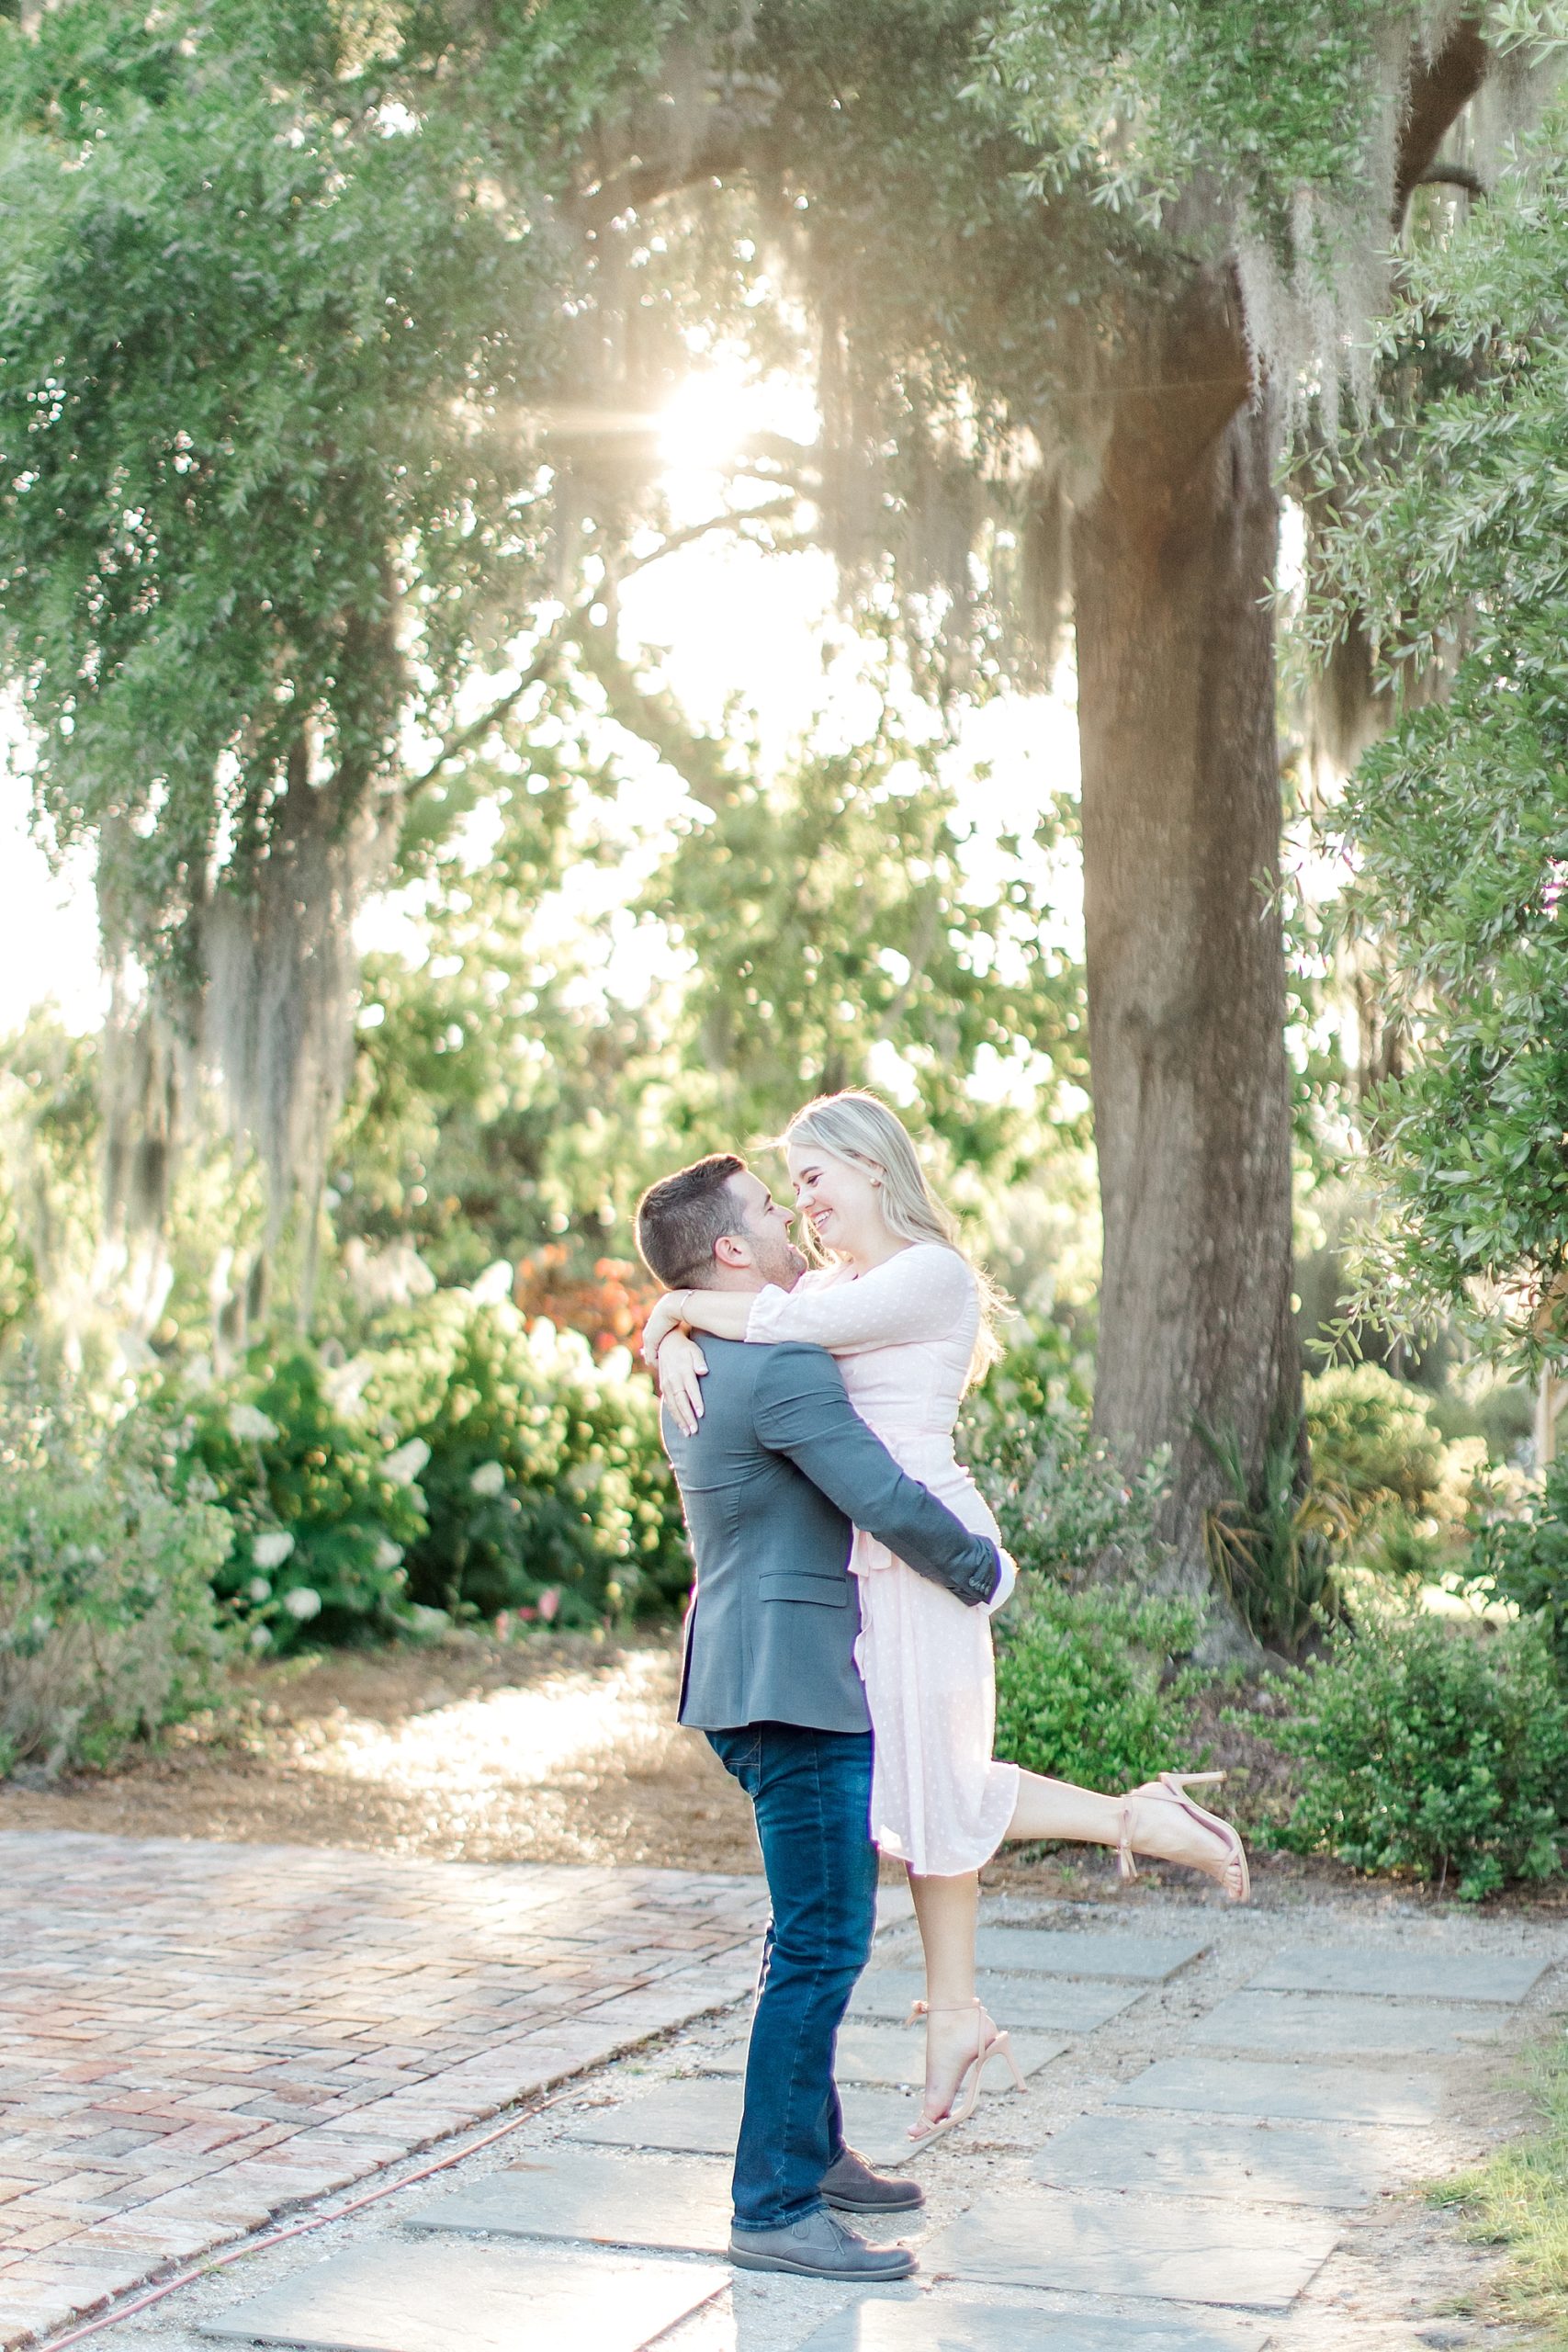 man lifts fiance up as sunshine gleams through the trees